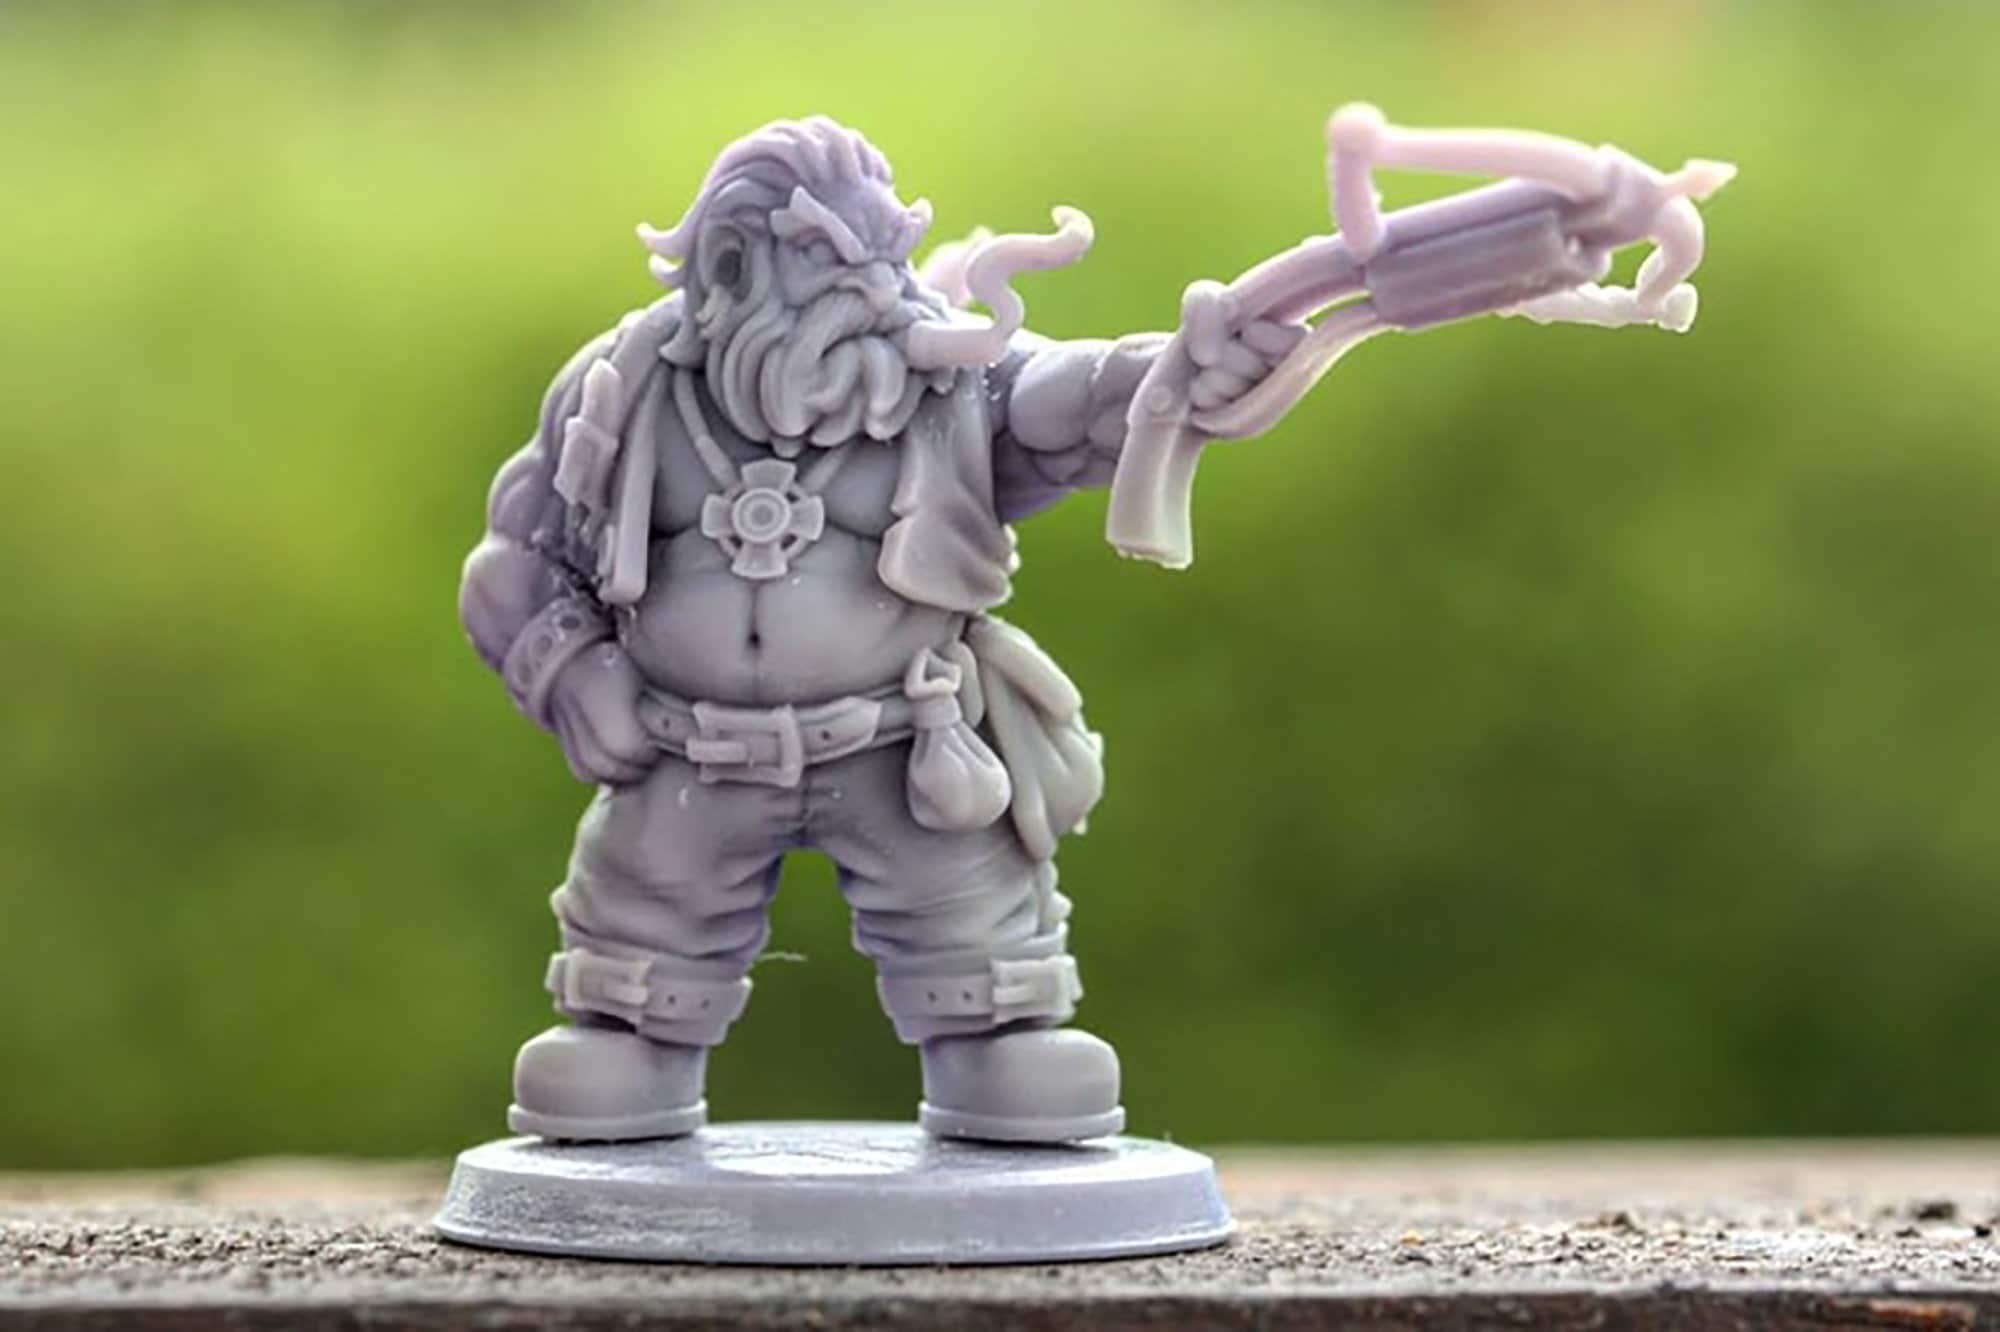 DWARF RANGER (2 Versions) "Big holin longlook" | Dungeons and Dragons | DnD | Pathfinder | Tabletop | RPG | Hero Size | 28 mm-Role Playing Miniatures